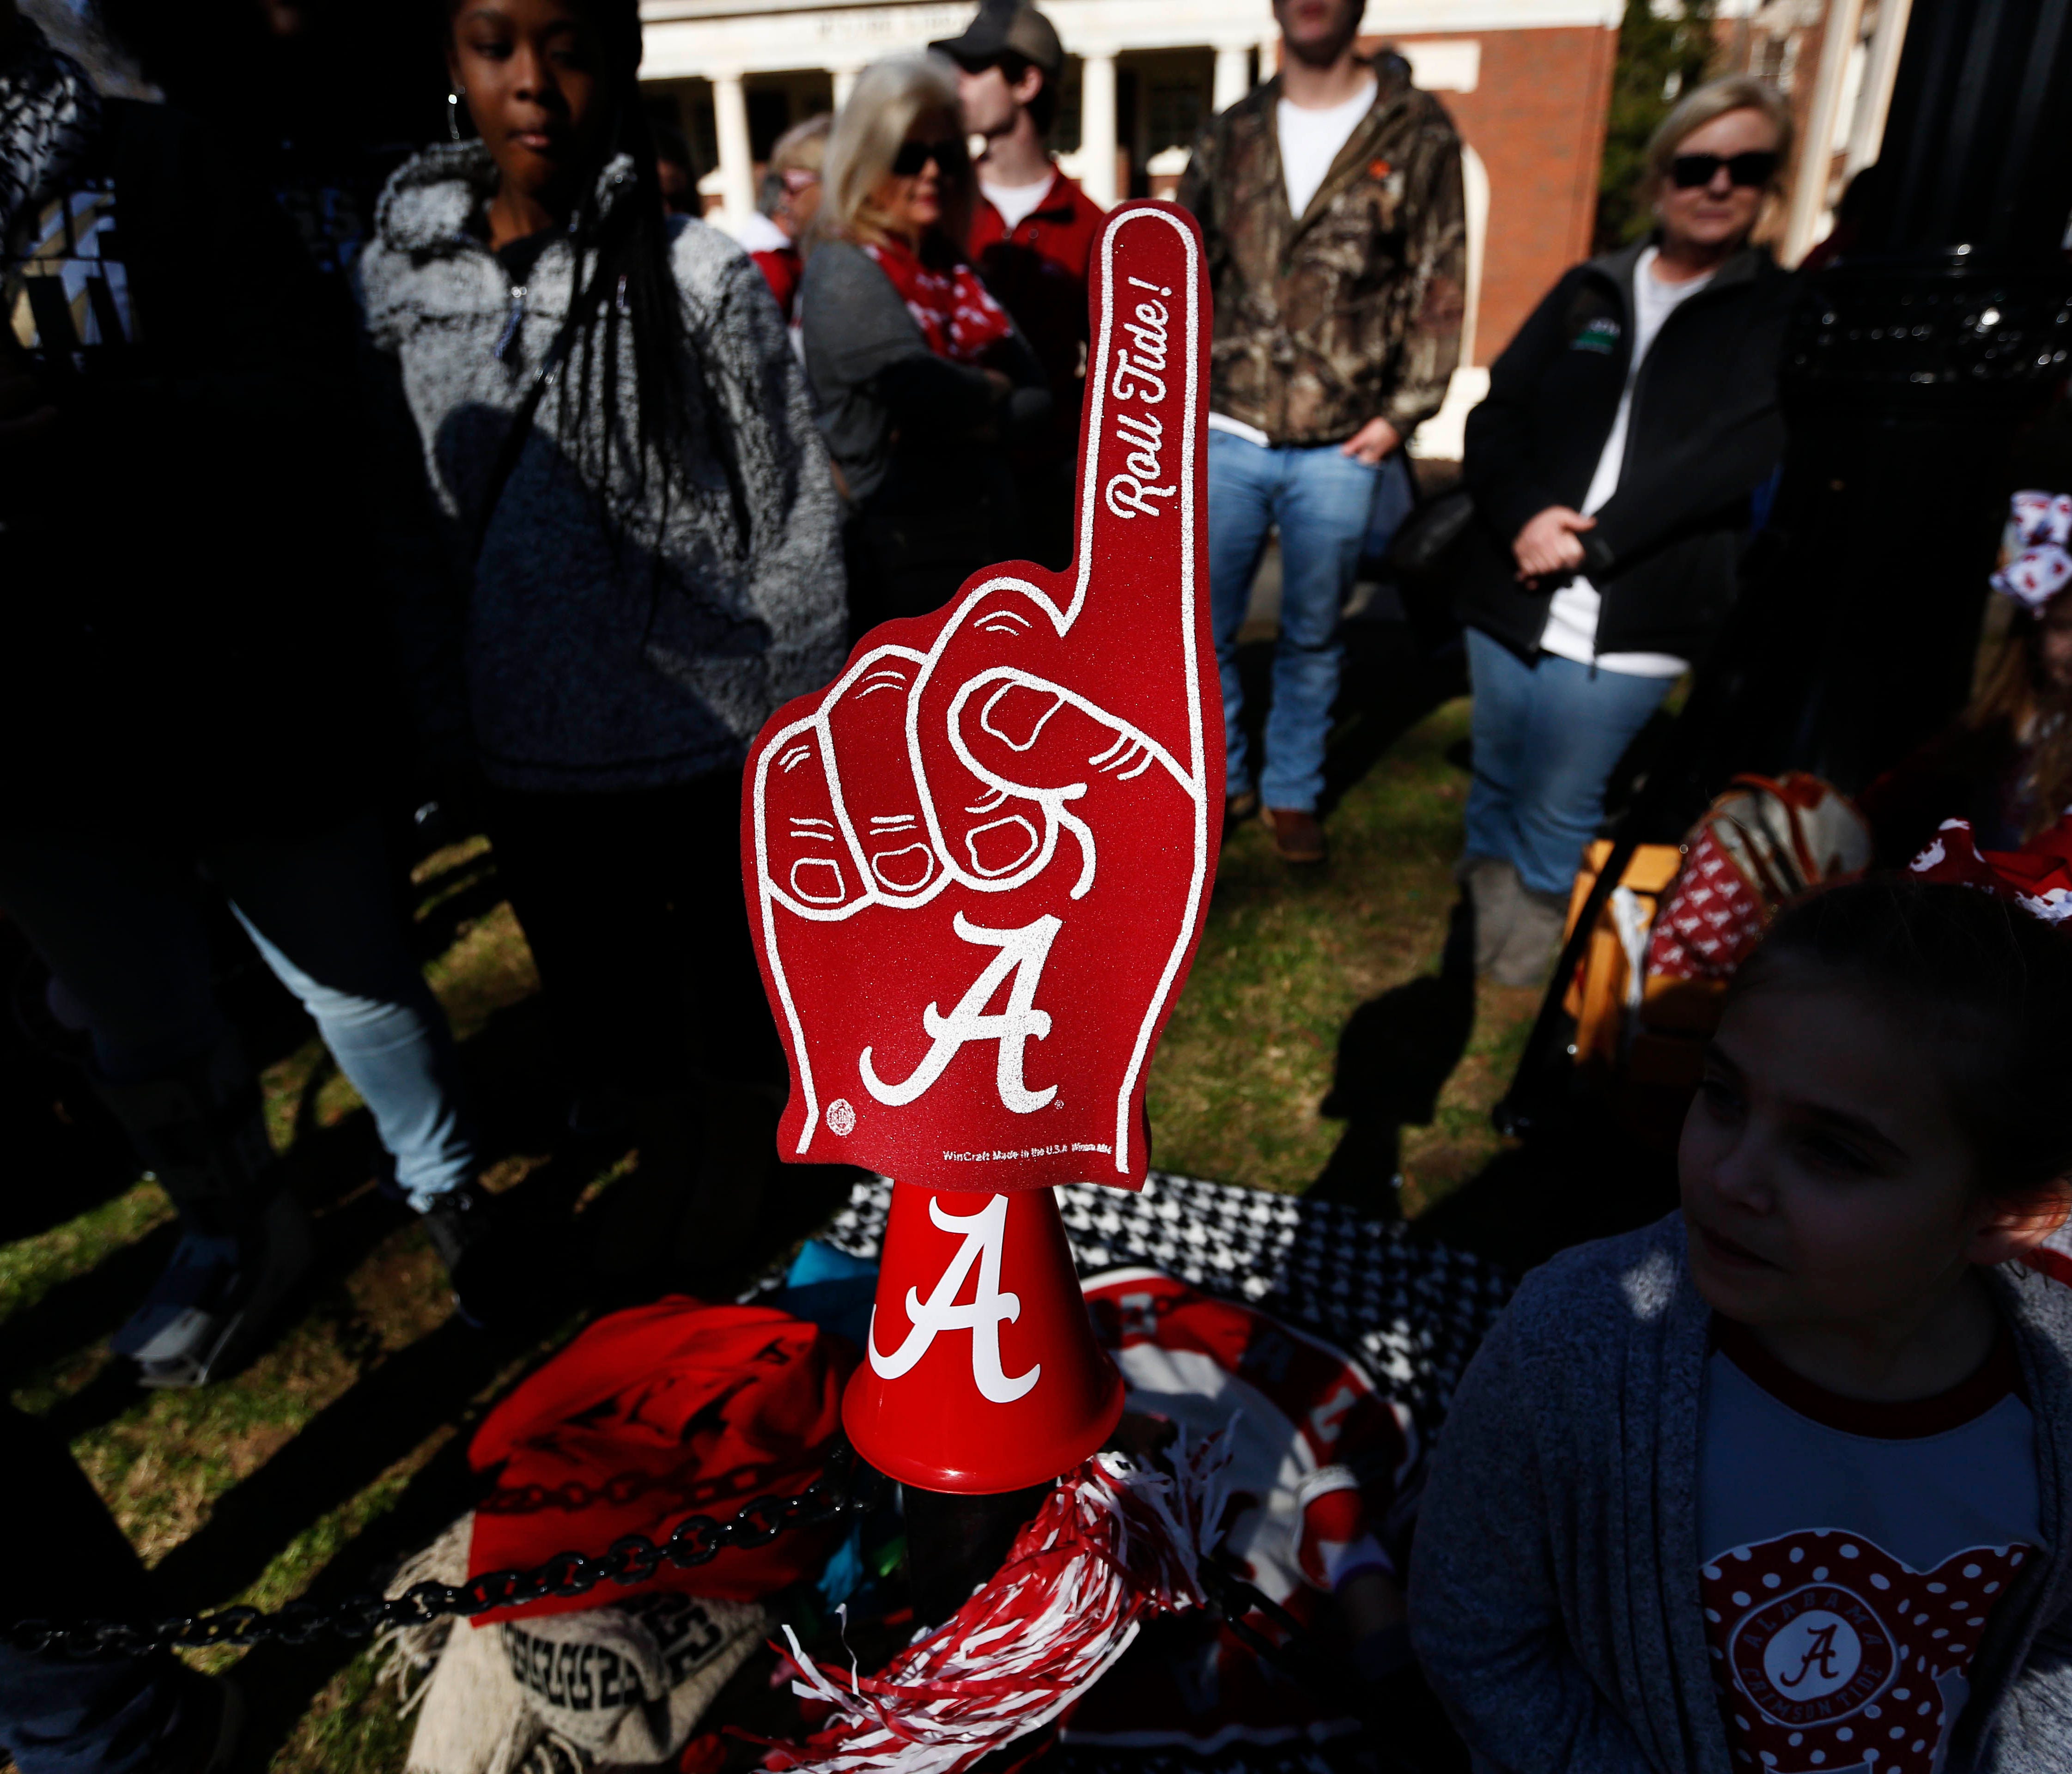 A fan placed a foam finger on a sidewalk gate before the NCAA college football national championship parade, Saturday, Jan. 20, 2018, in Tuscaloosa, Ala. Alabama won the national championship game against Georgia 26-23 in overtime. (AP Photo/Brynn An